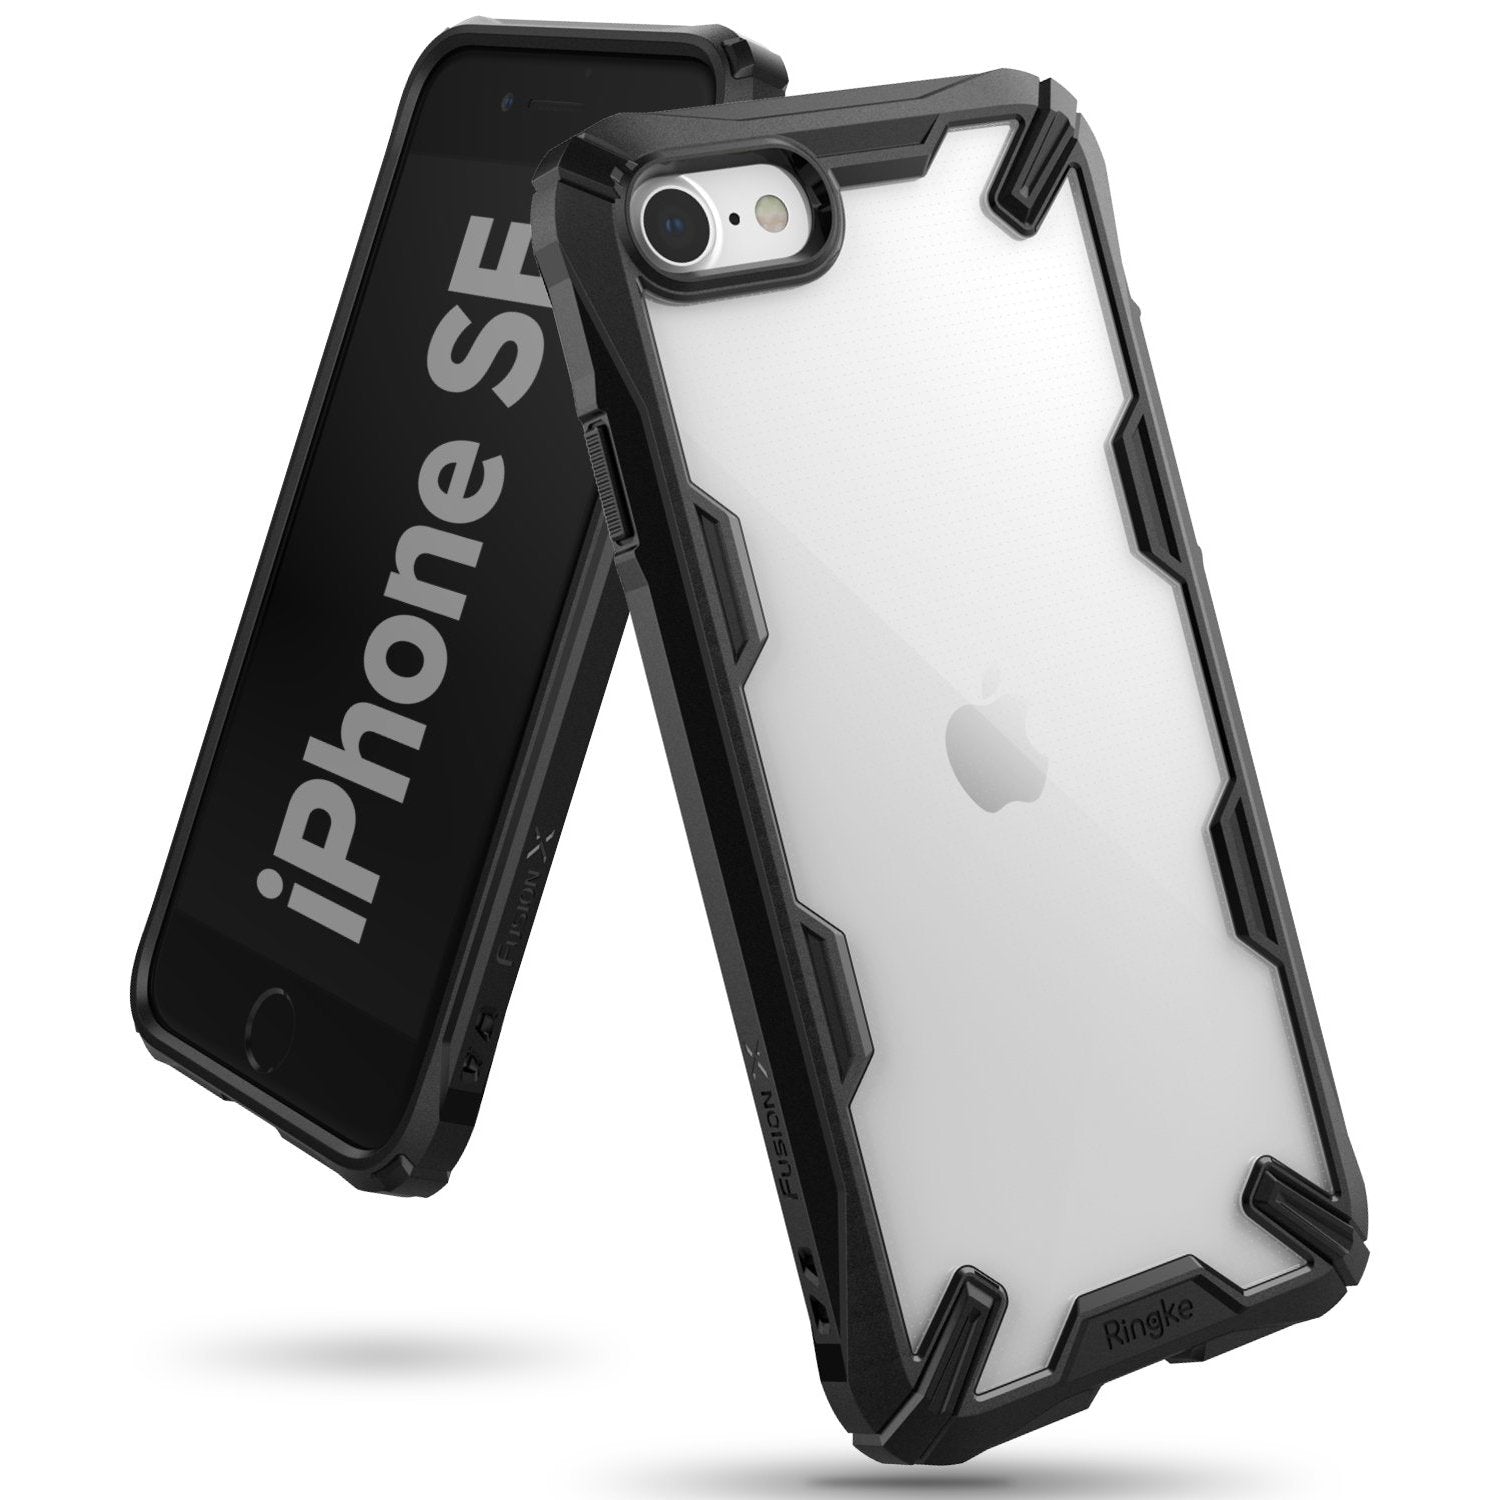 Ringke Fusion X Case for iPhone SE 2nd Generation/iPhone 8/7 4.7"